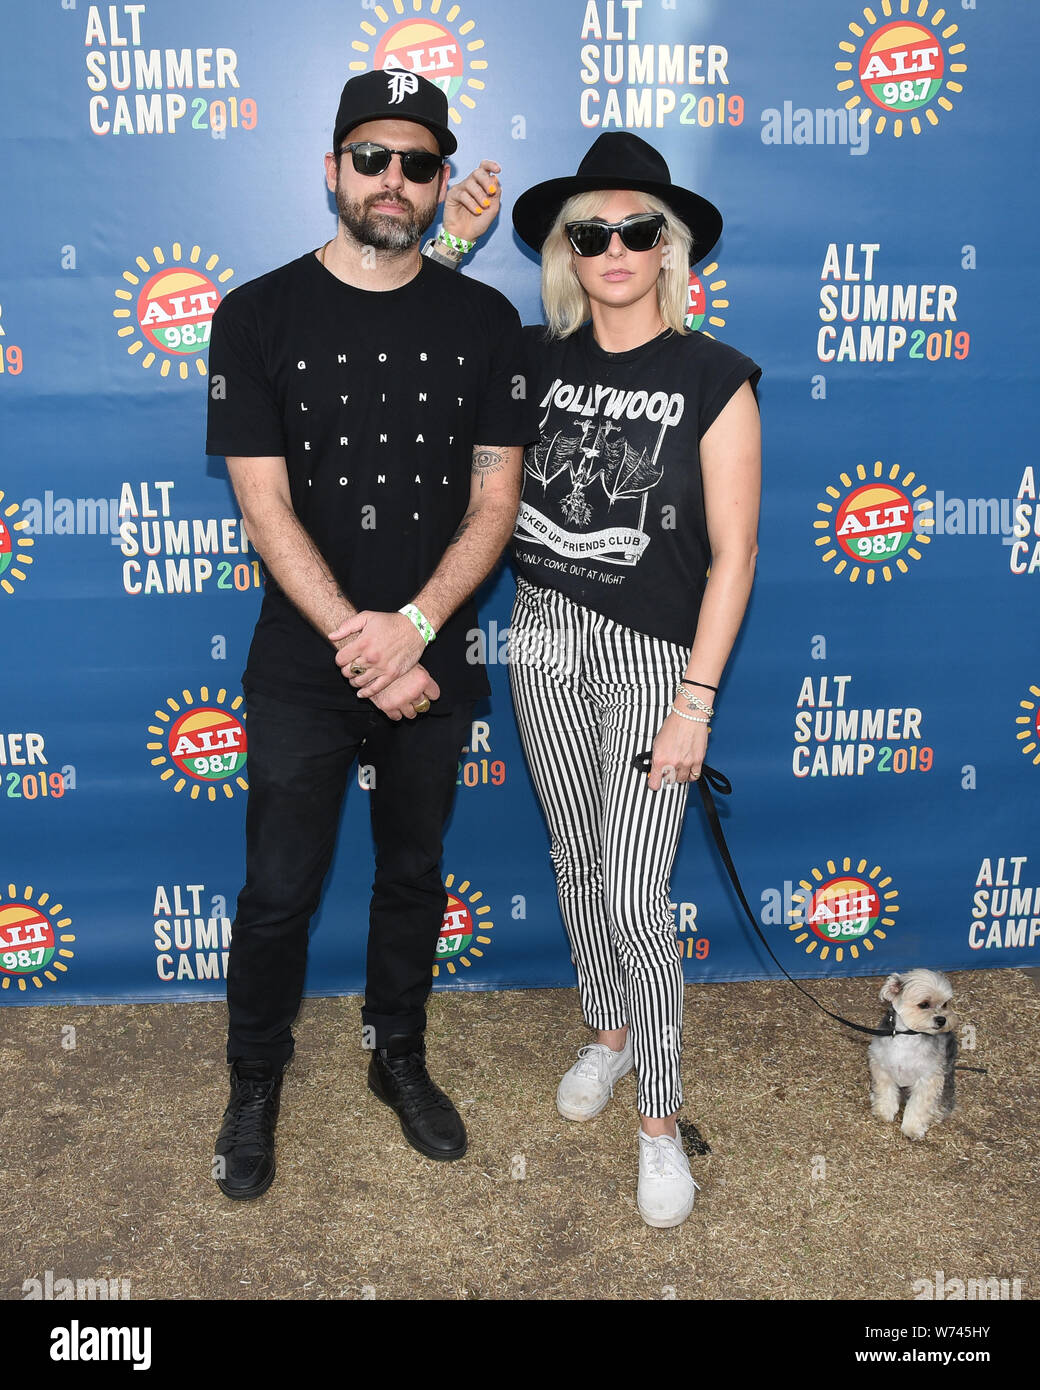 Long Beach, California, USA. 3rd Aug 2019. Josh Carter and Sarah Barthel of the band Phantogram pose for a portrait backstage ALT 98.7 Summer Camp at the Queen Mary Event Park in Long Beach on August 3, 2019. Credit: The Photo Access/Alamy Live News Stock Photo